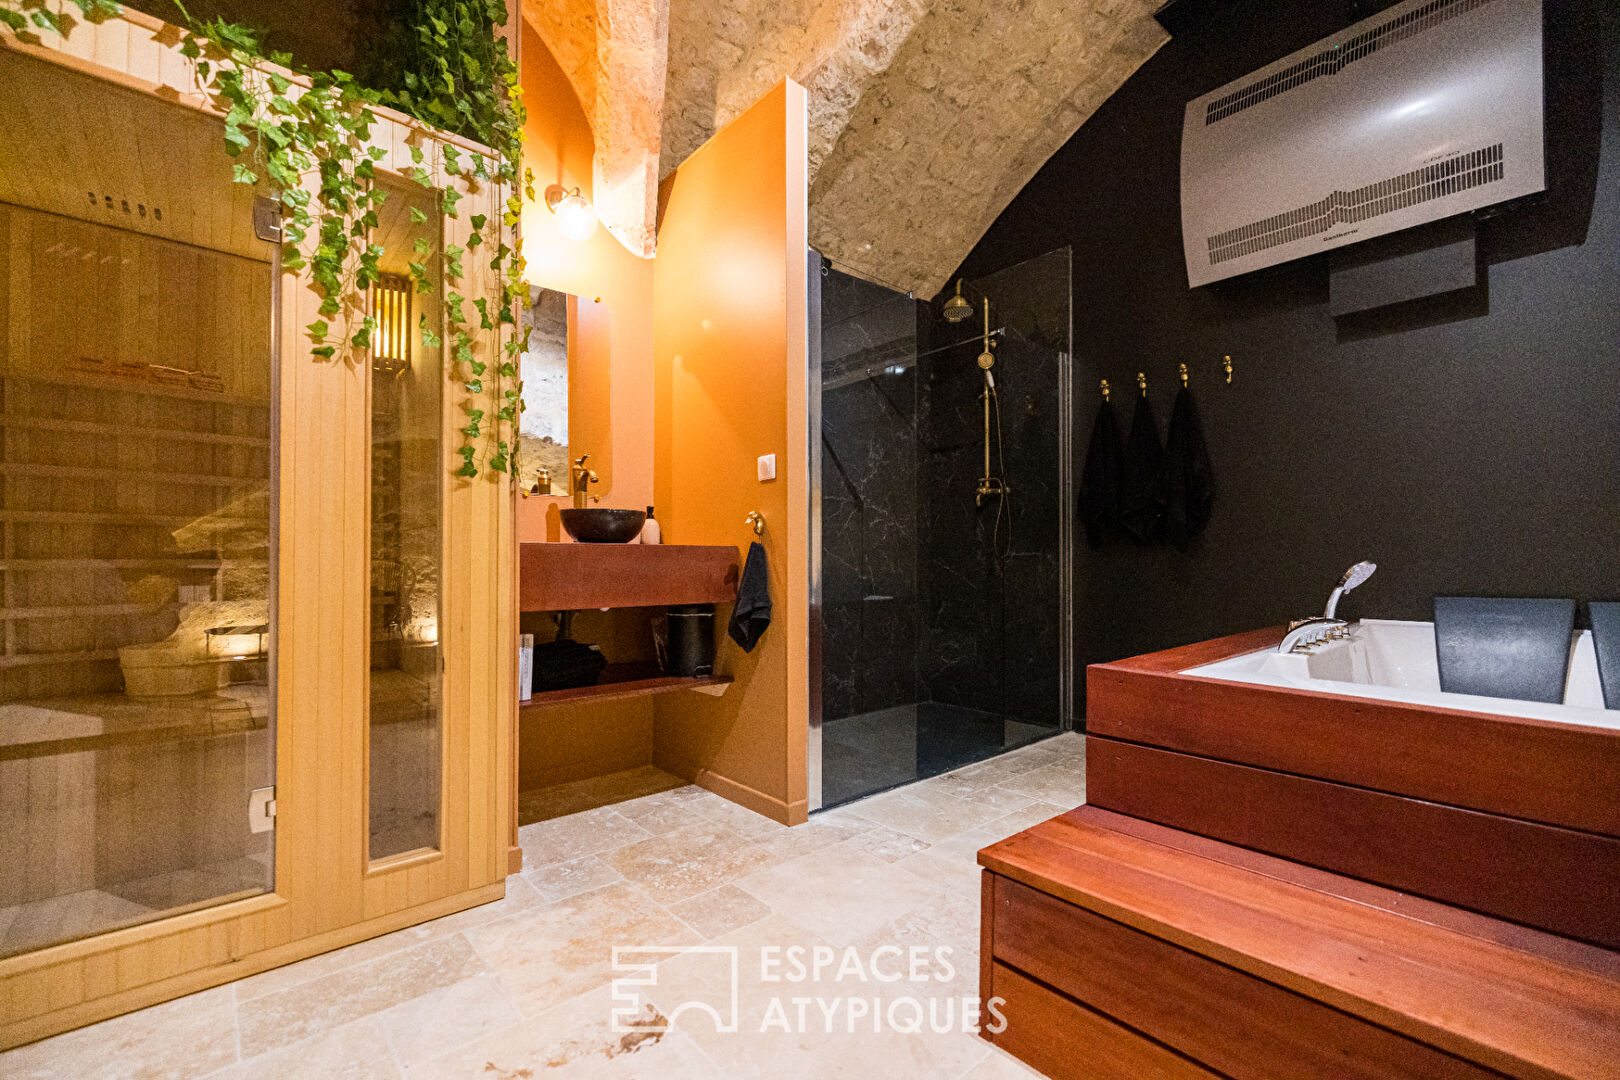 Renovated style apartment, and its 15th century crypt